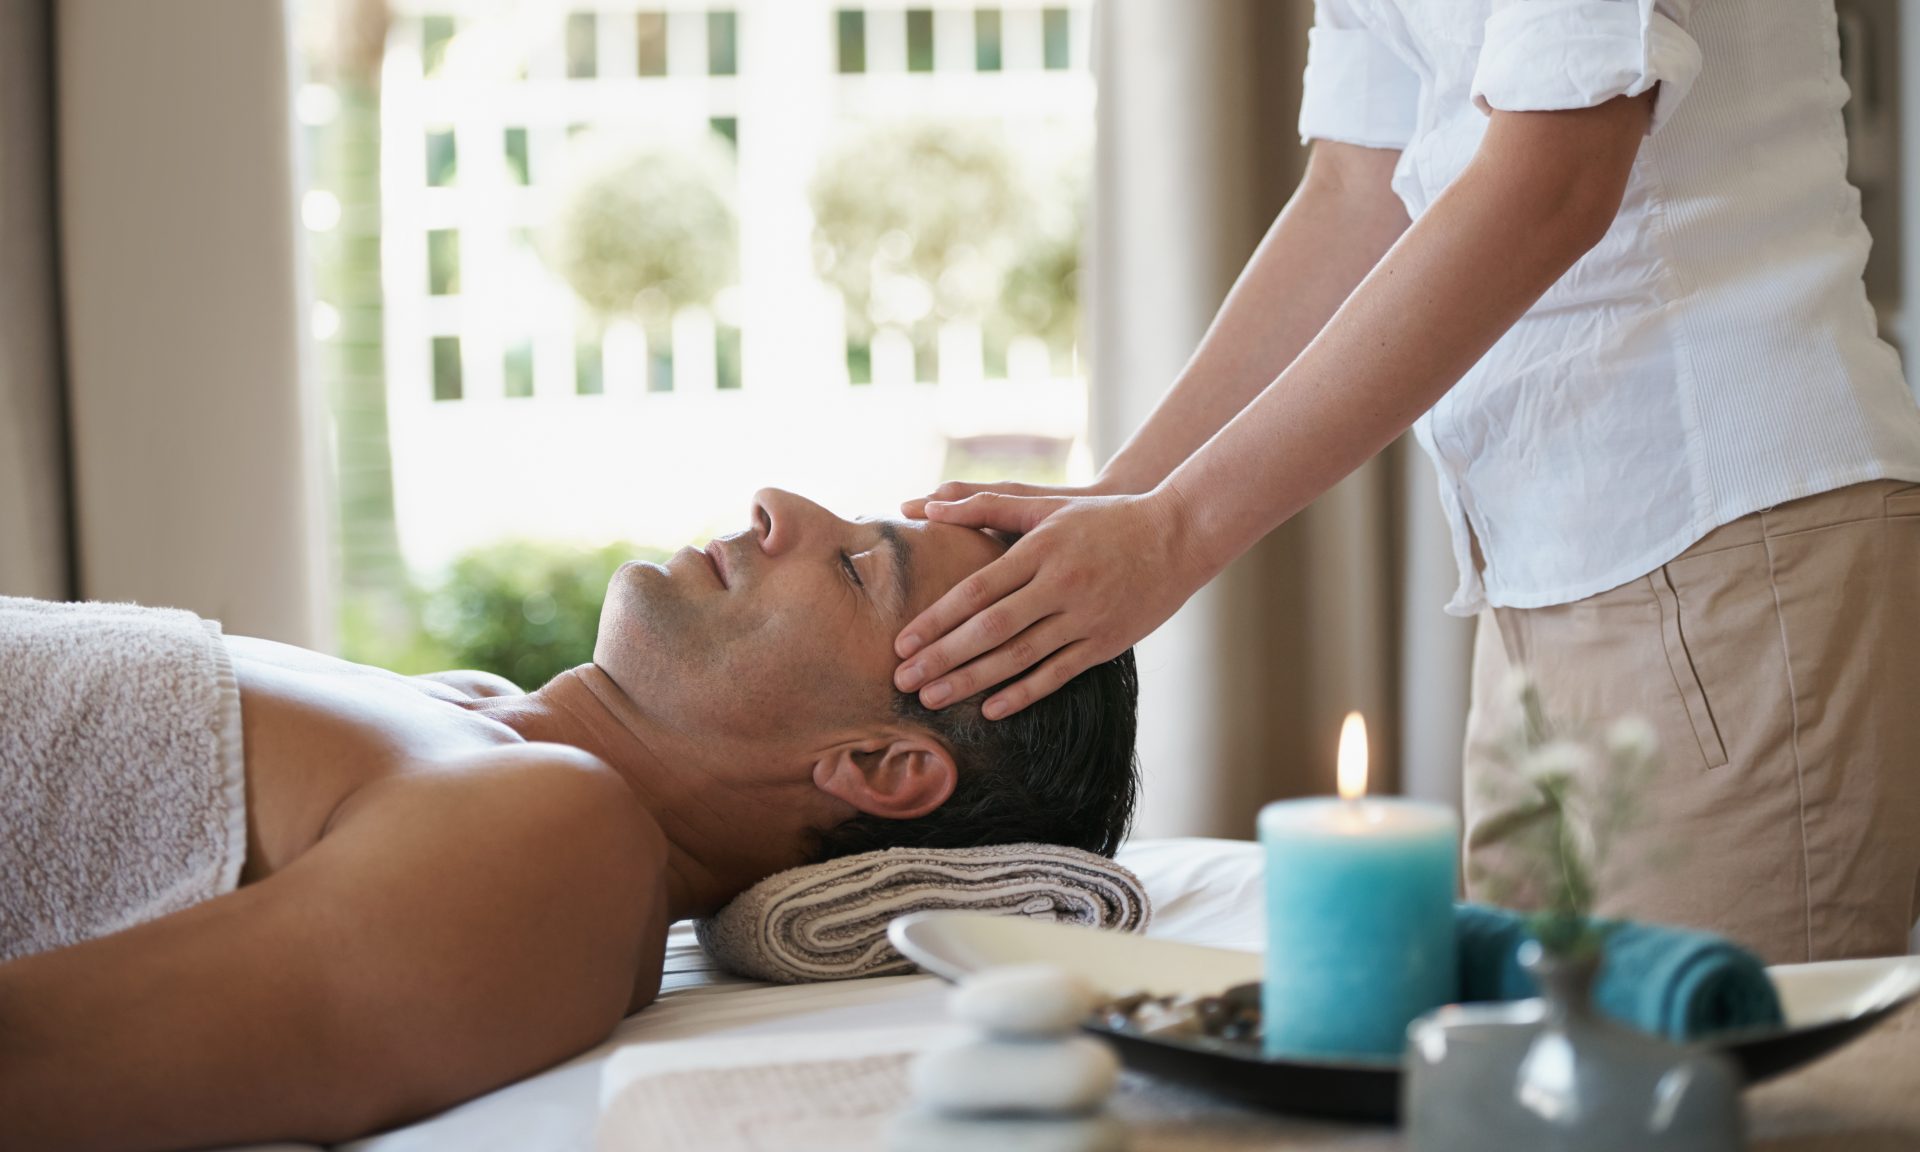 Understanding Legal Liabilities in Massage Therapy: Why Liability Insurance is a Must-Have